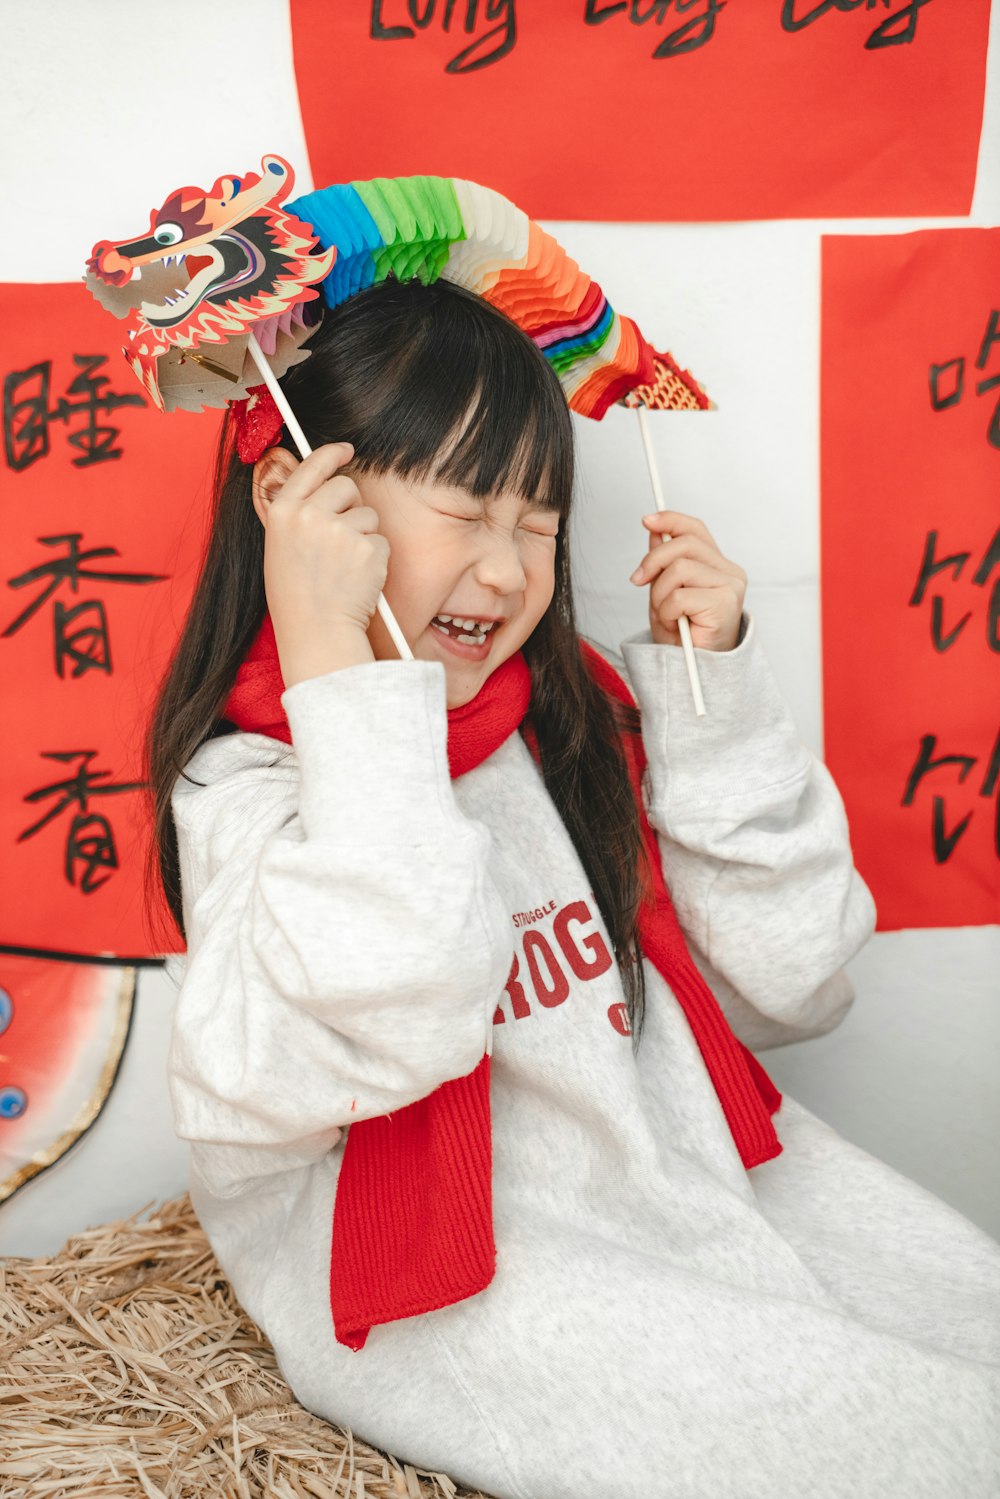 a young girl is holding a toothbrush and wearing a dragon headdress